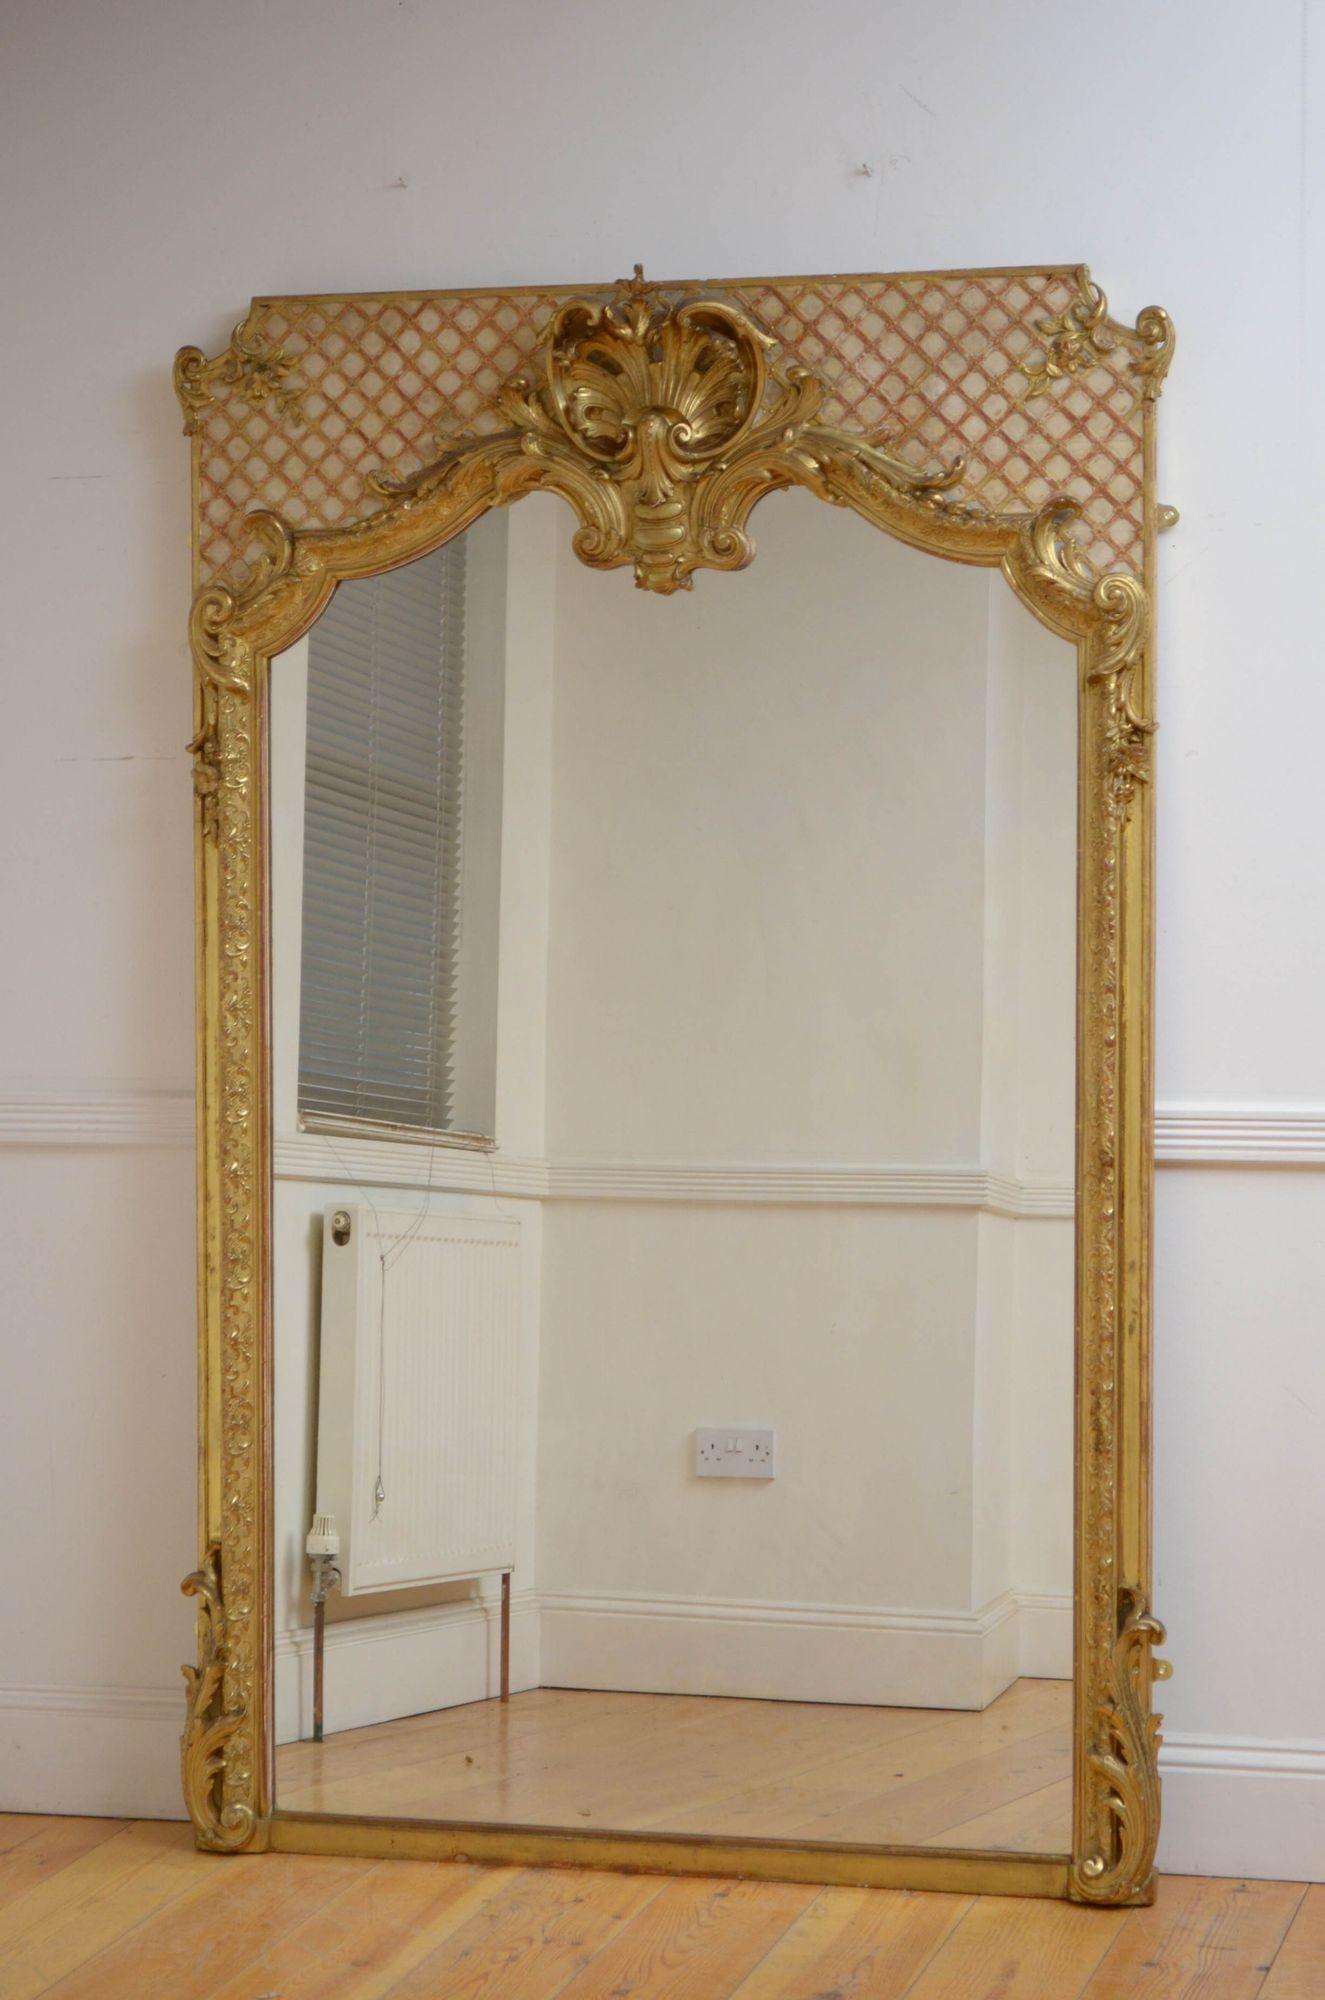 Sn5325 Superb XIXth century French giltwood mirror, having original glass with minor imperfections in moulded and gilded frame which is decorated with elaborate scrolls, flowers and shell to the centre all on lattice decorated back. This antique